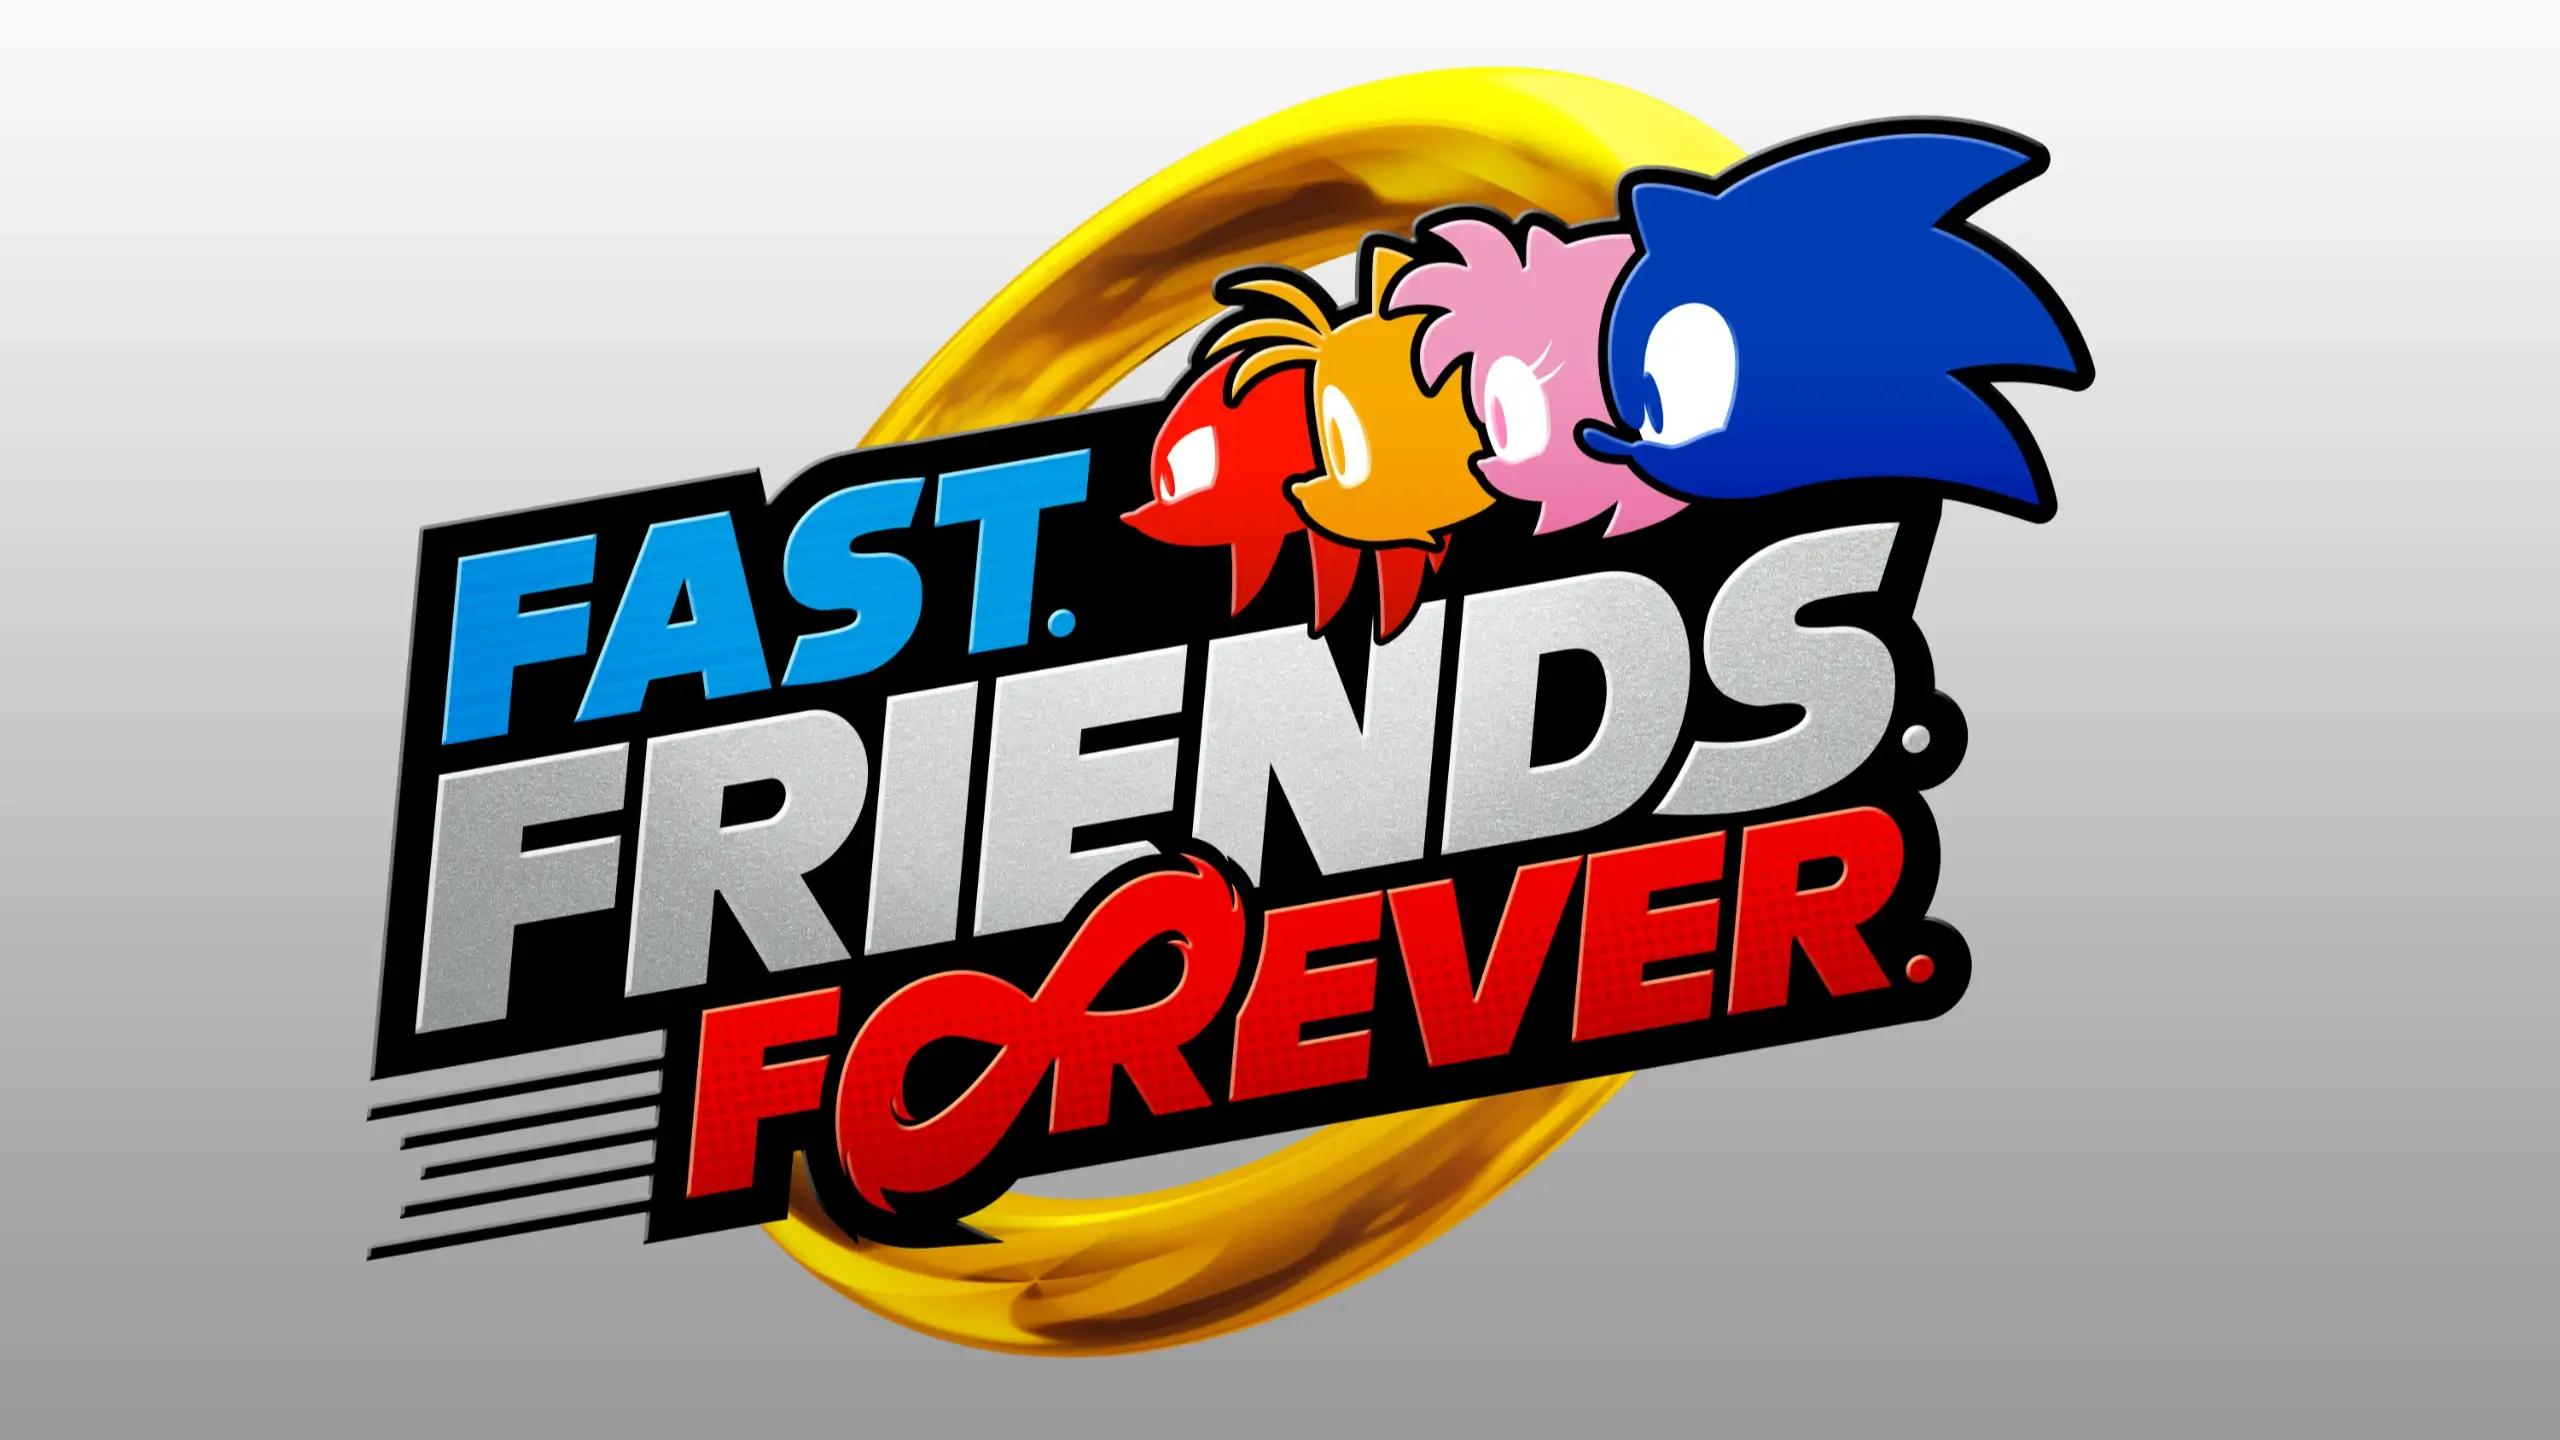 sonic fast friends forever